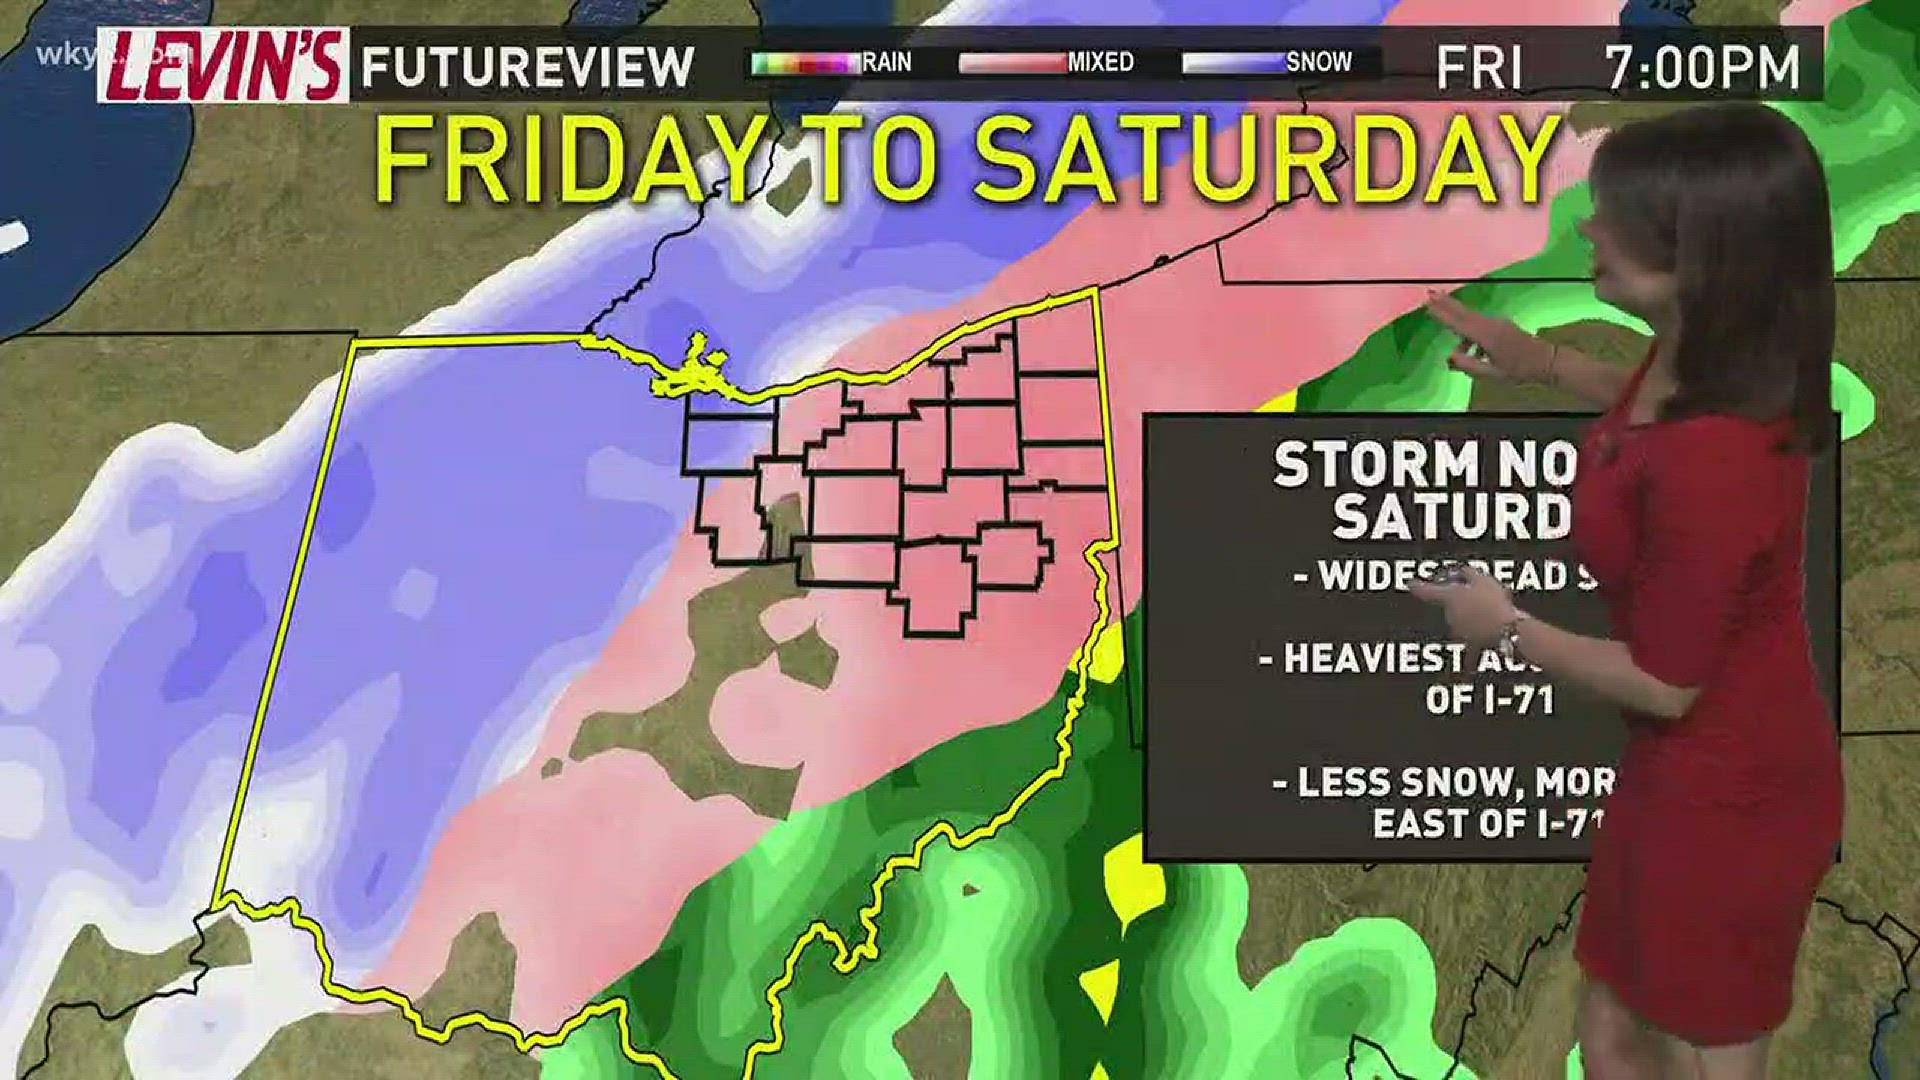 Jan. 11, 2018: An incoming winter storm is set to hit Northeast Ohio with ice and snow. Hollie Strano has the details. Follow @holliesmiles on Twitter for more.